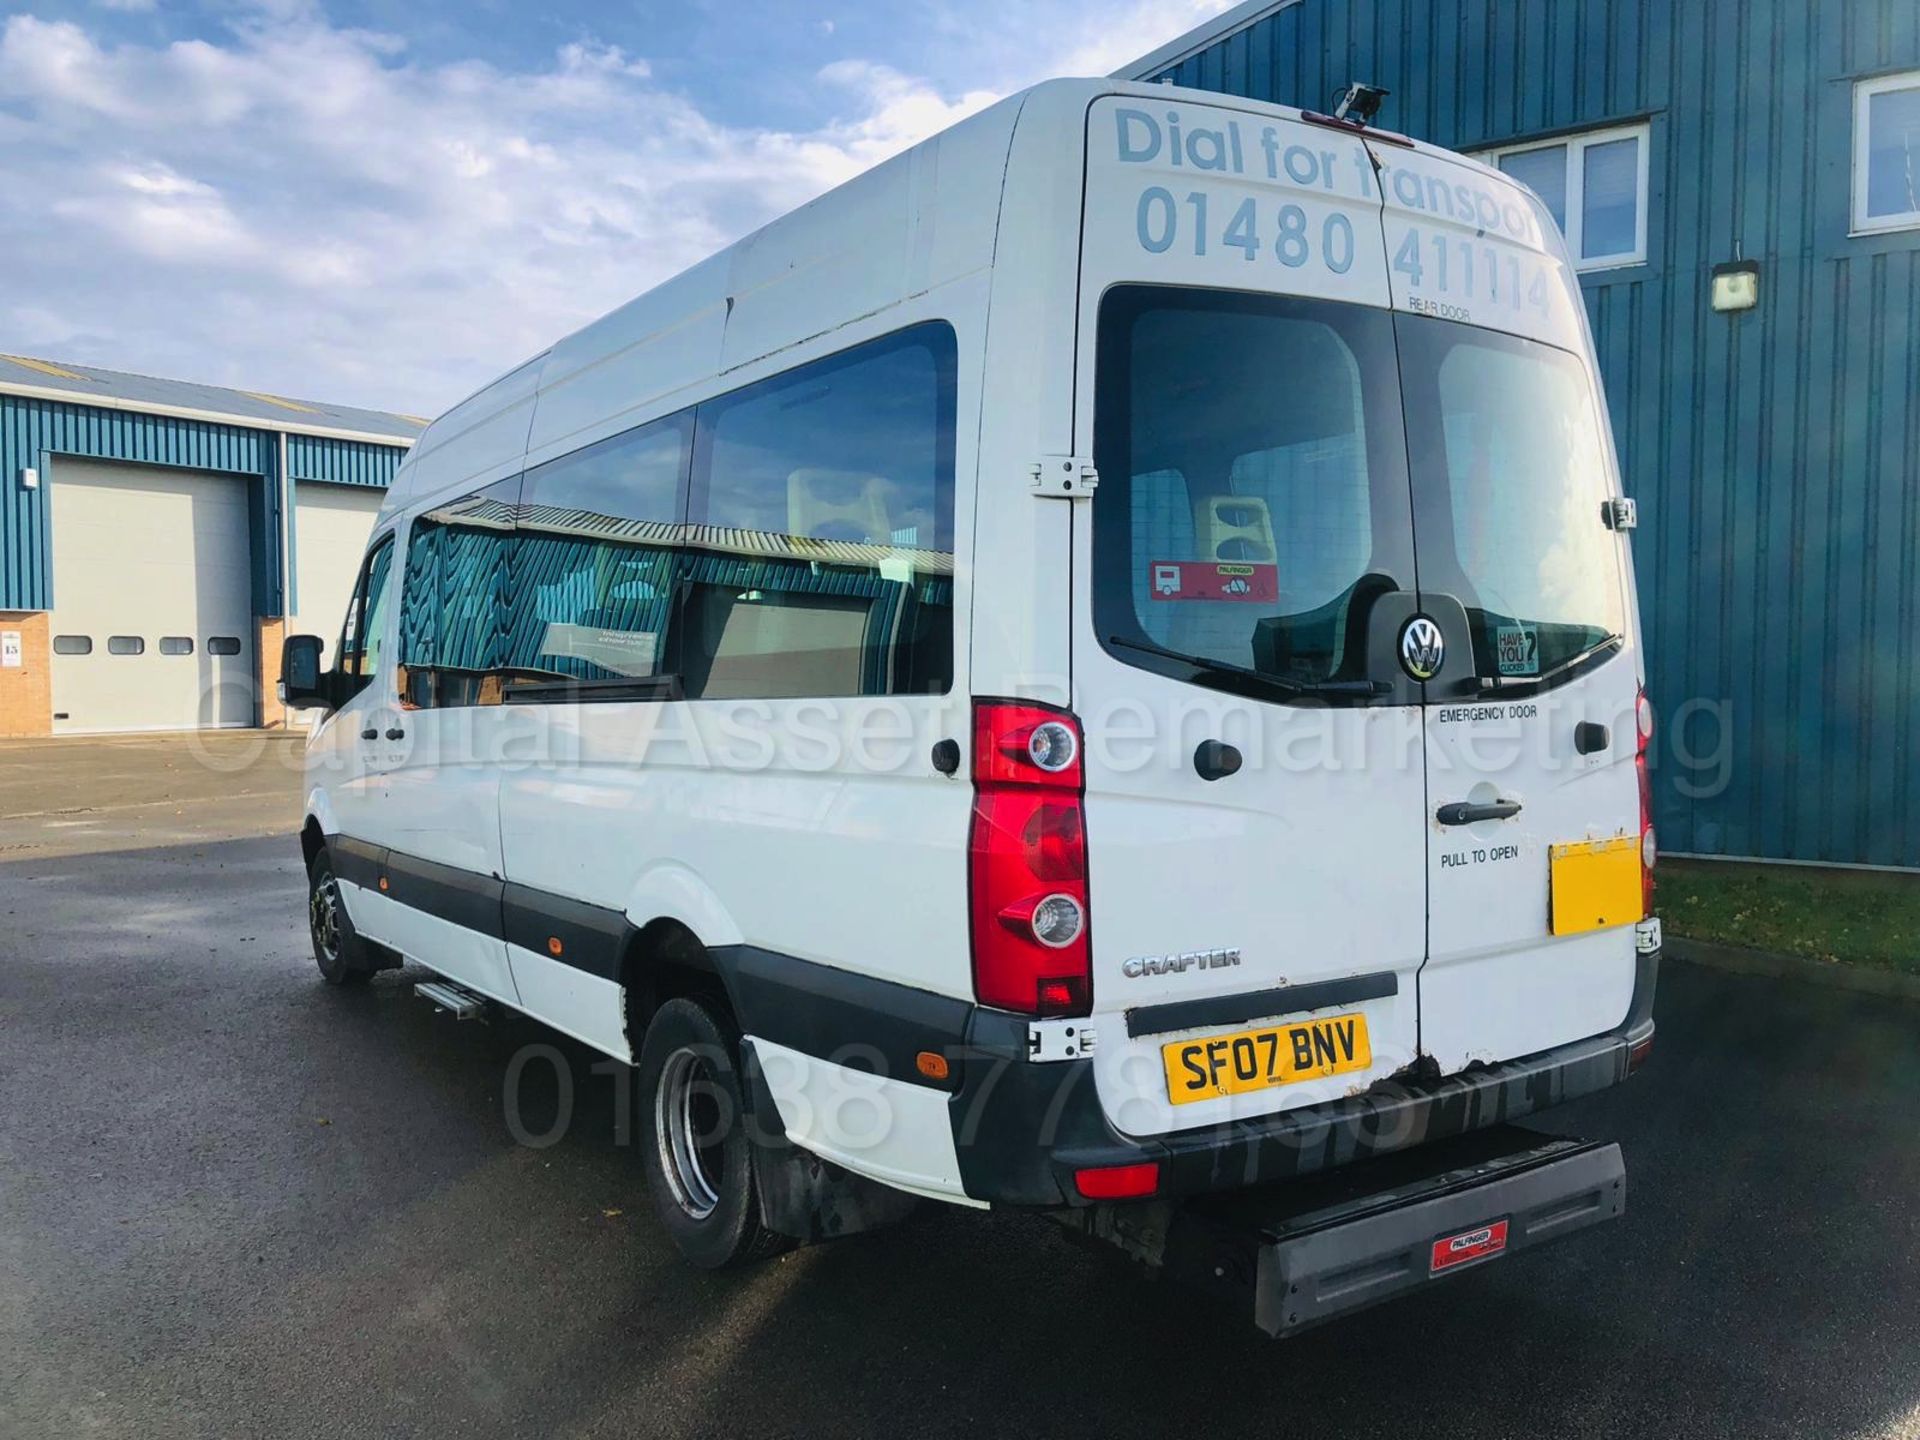 VOLKSWAGEN CRAFTER 2.5 TDI *LWB - 16 SEATER MINI-BUS / COACH* (2007) *ELECTRIC WHEEL CHAIR LIFT* - Image 13 of 38